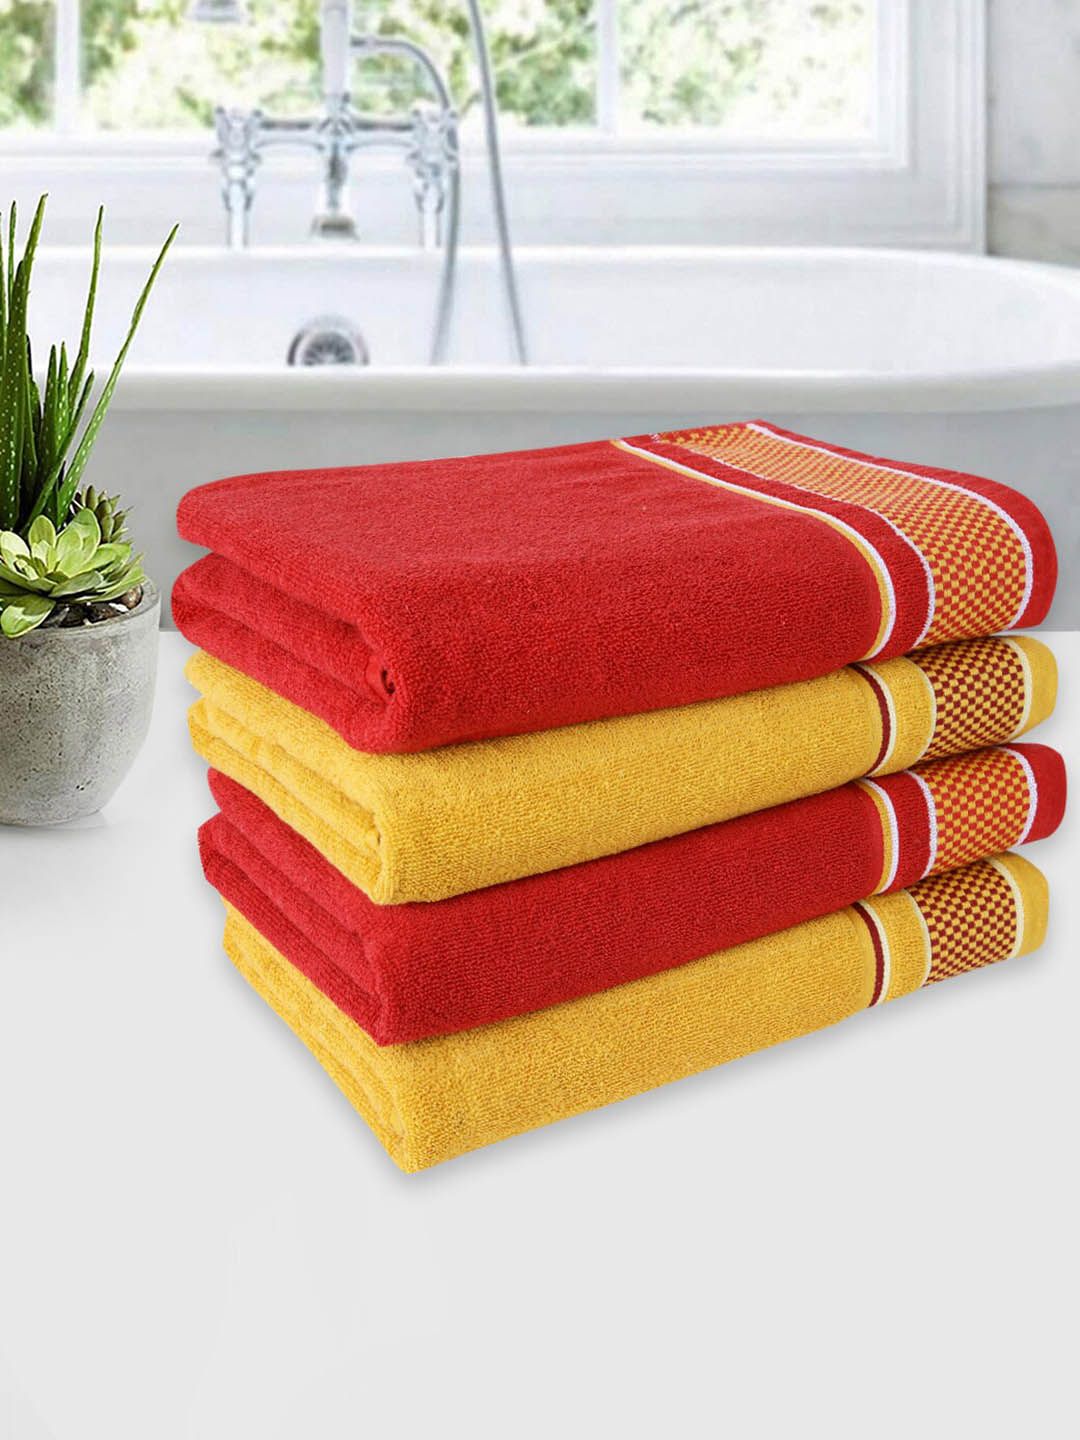 ROMEE Set Of 4 Red & Yellow Solid 500 GSM Cotton Bath Towels Price in India